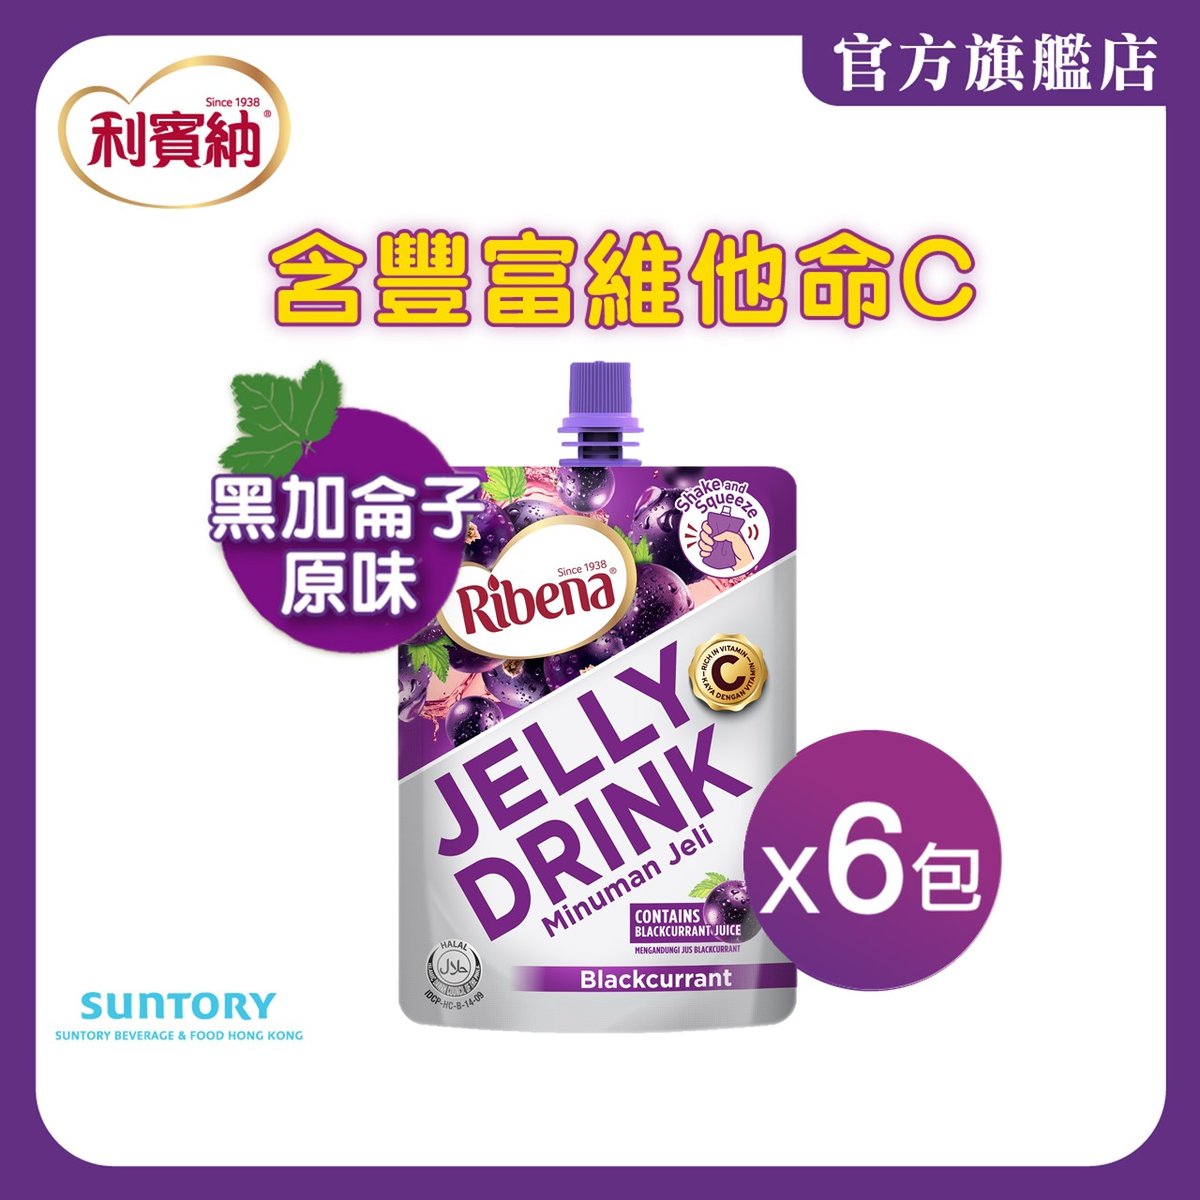 Blackcurrant Jelly Drink 160G x 6 (Randomly Delivery on Packaging)